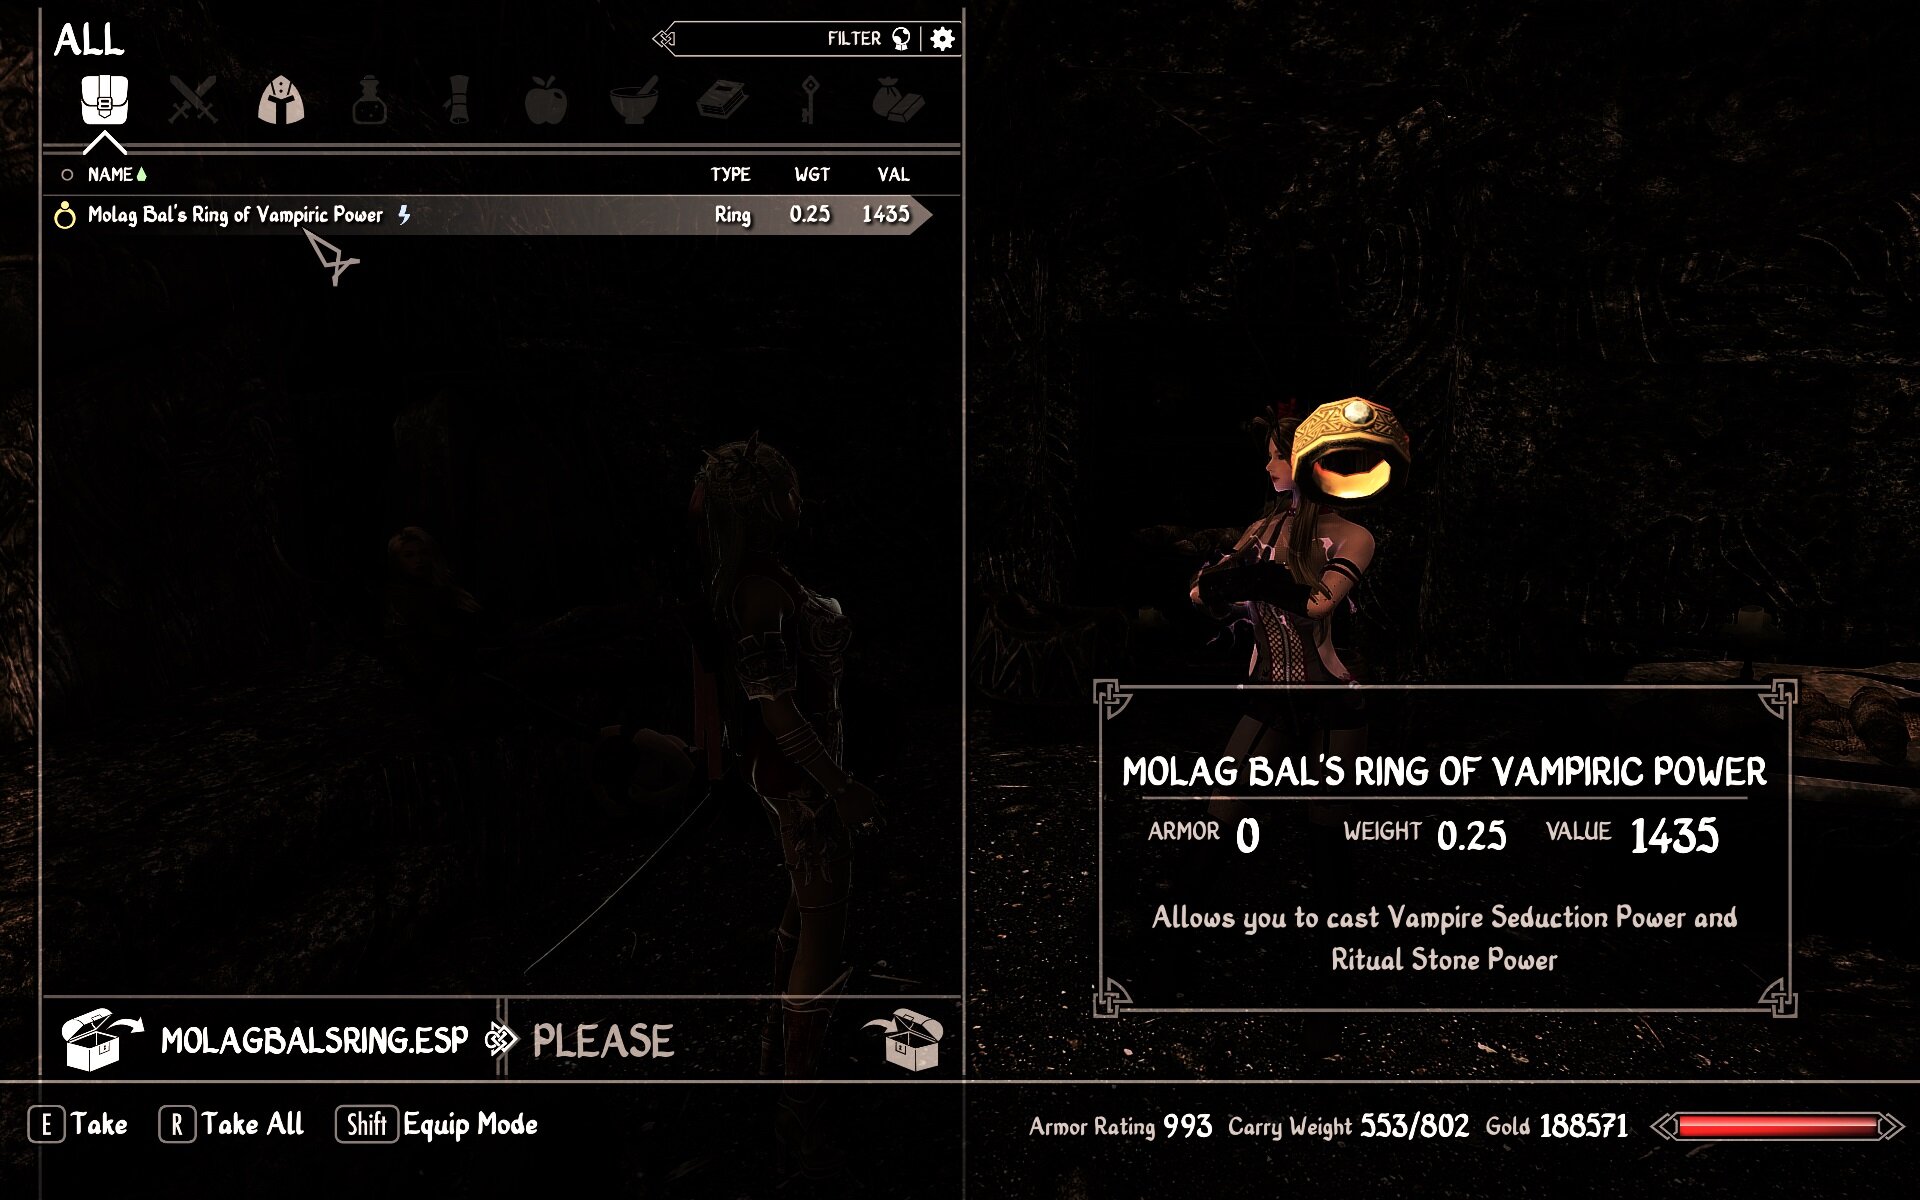 Molag Bal's Gift and Amulet